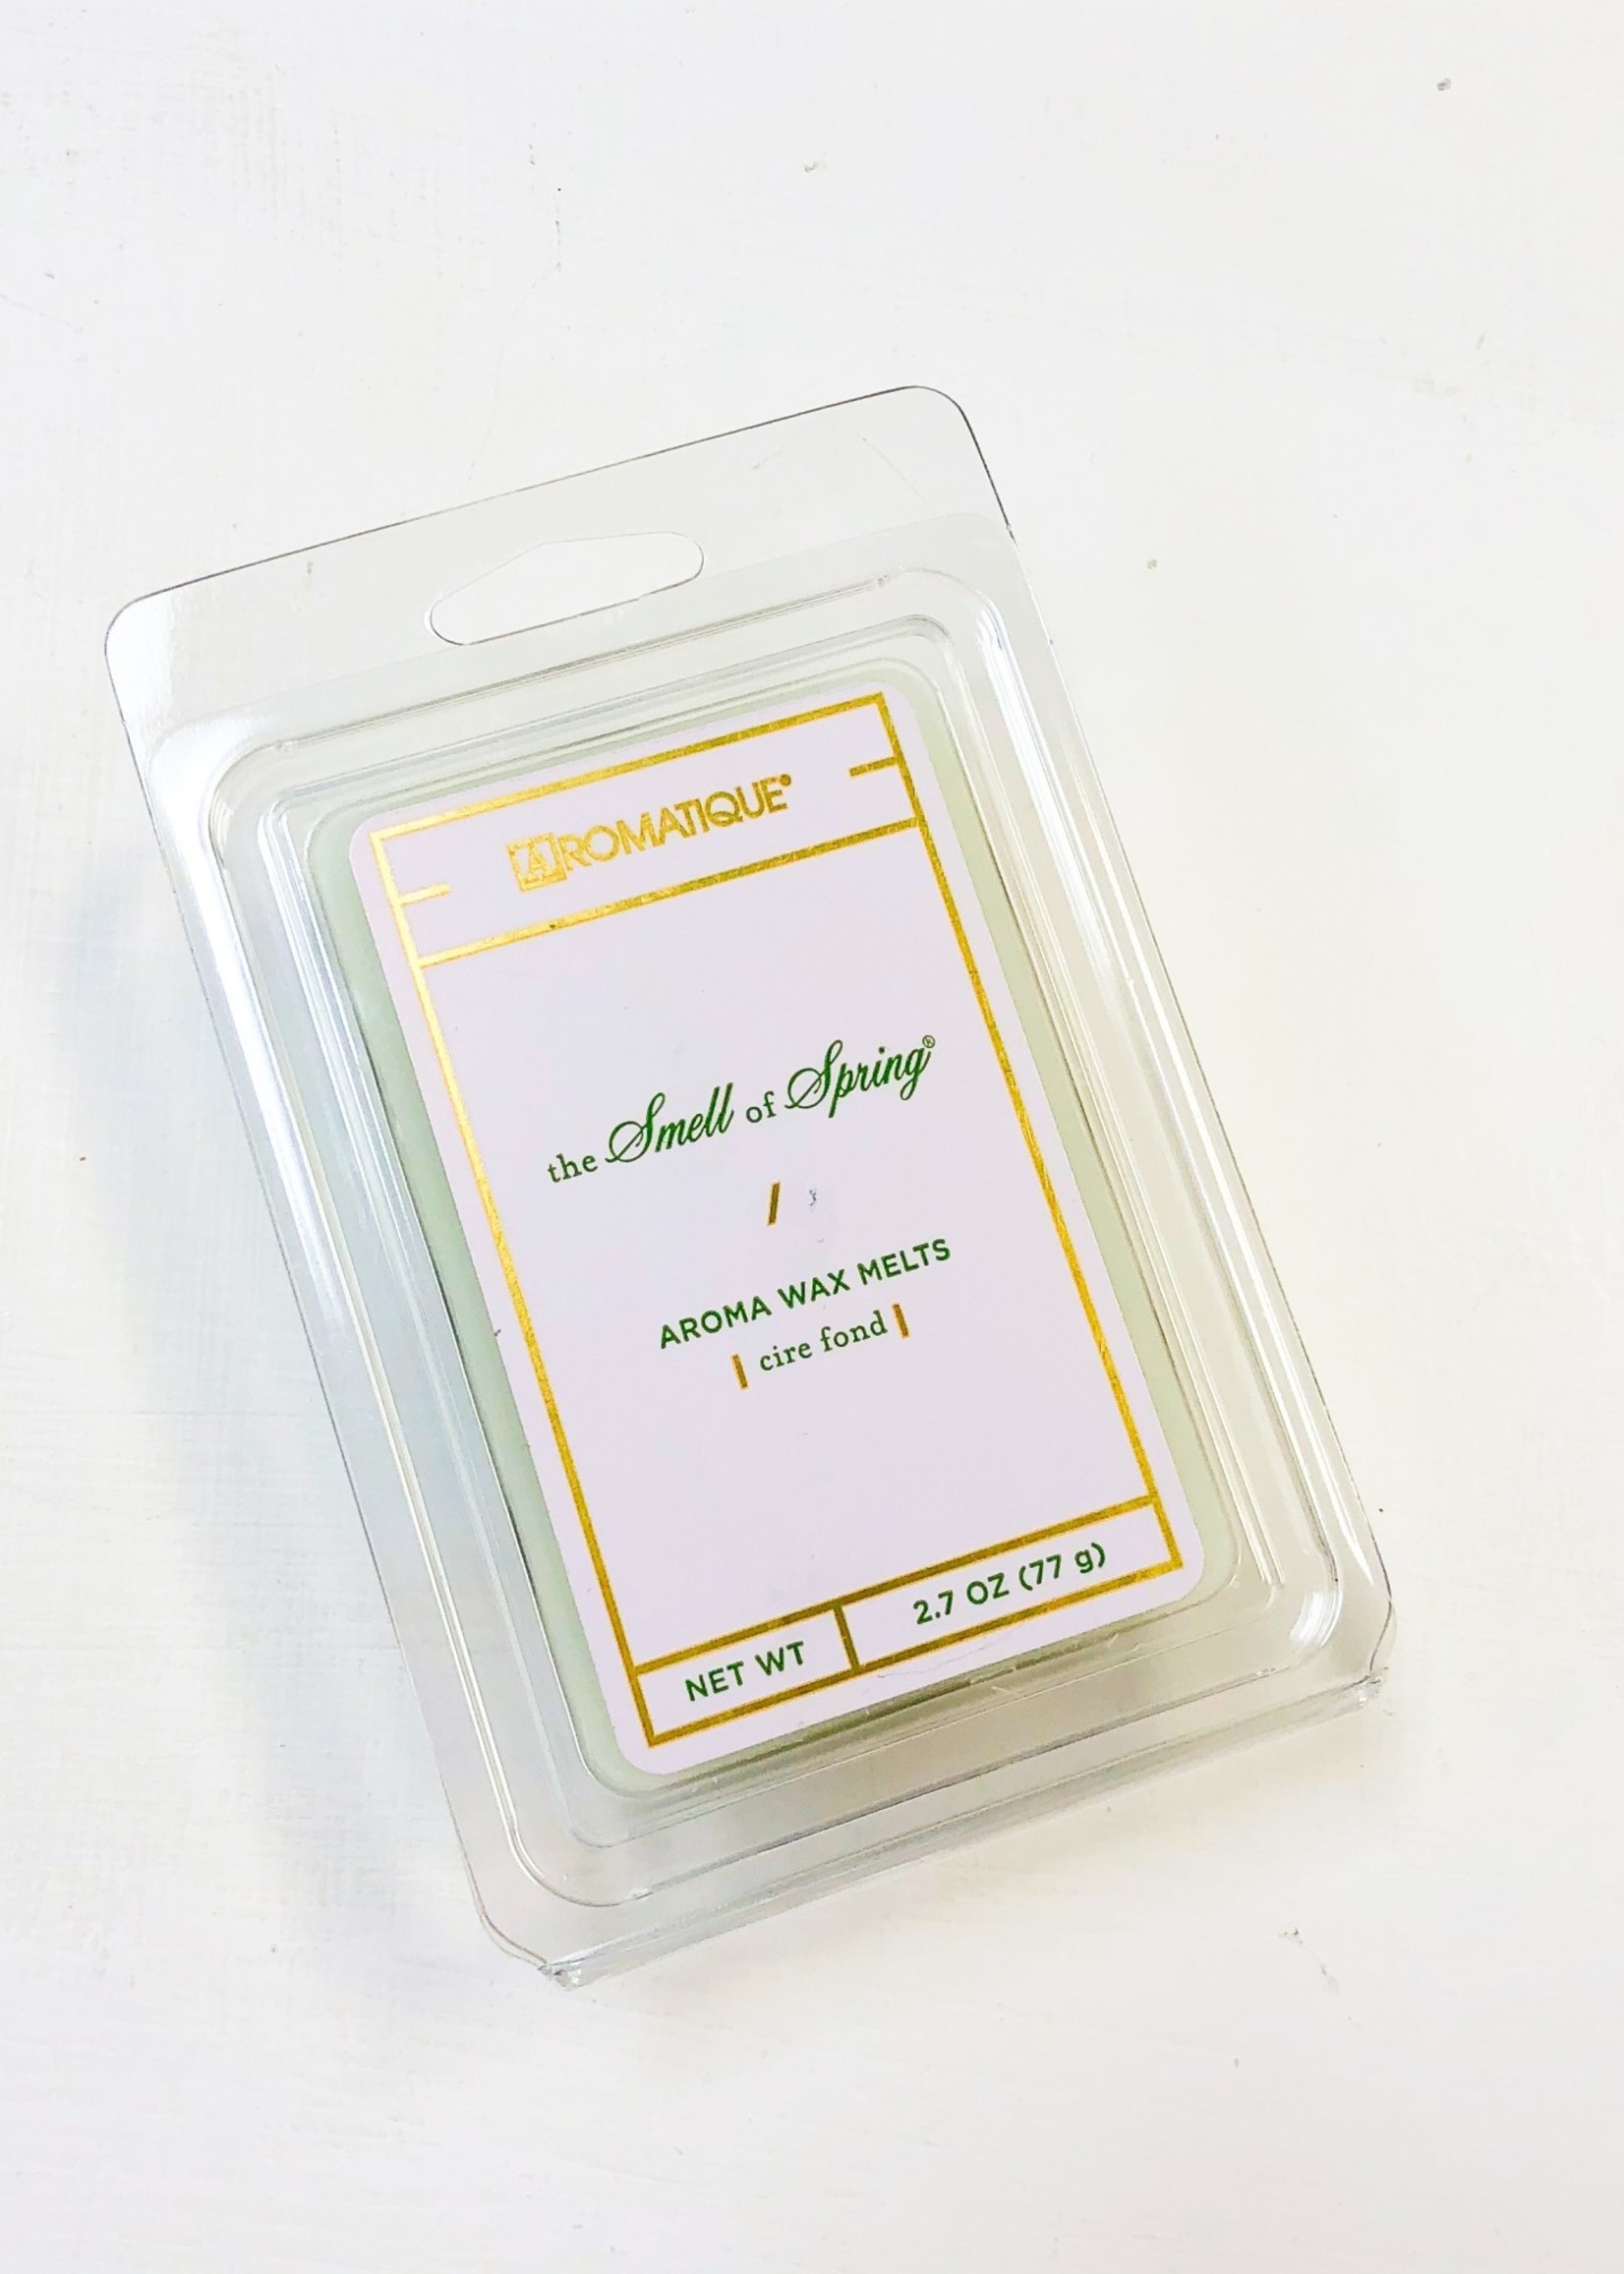 Aromatique The Smell Of Spring Aroma Wax Melts